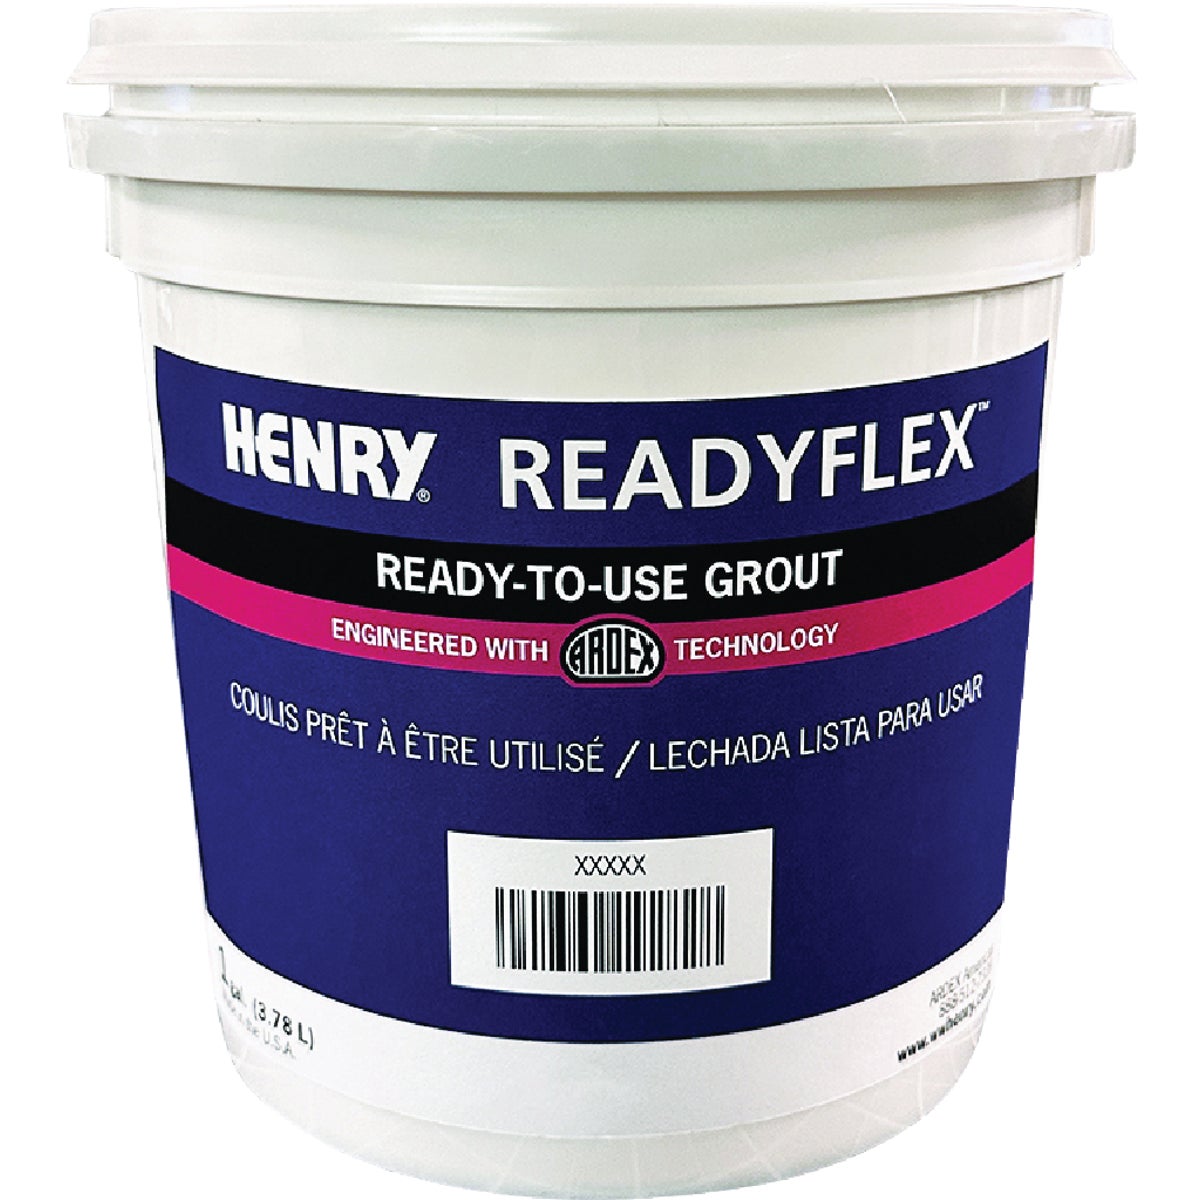 Henry READYFLEX 1 Gal. Fresh Lily Premixed Tile Grout